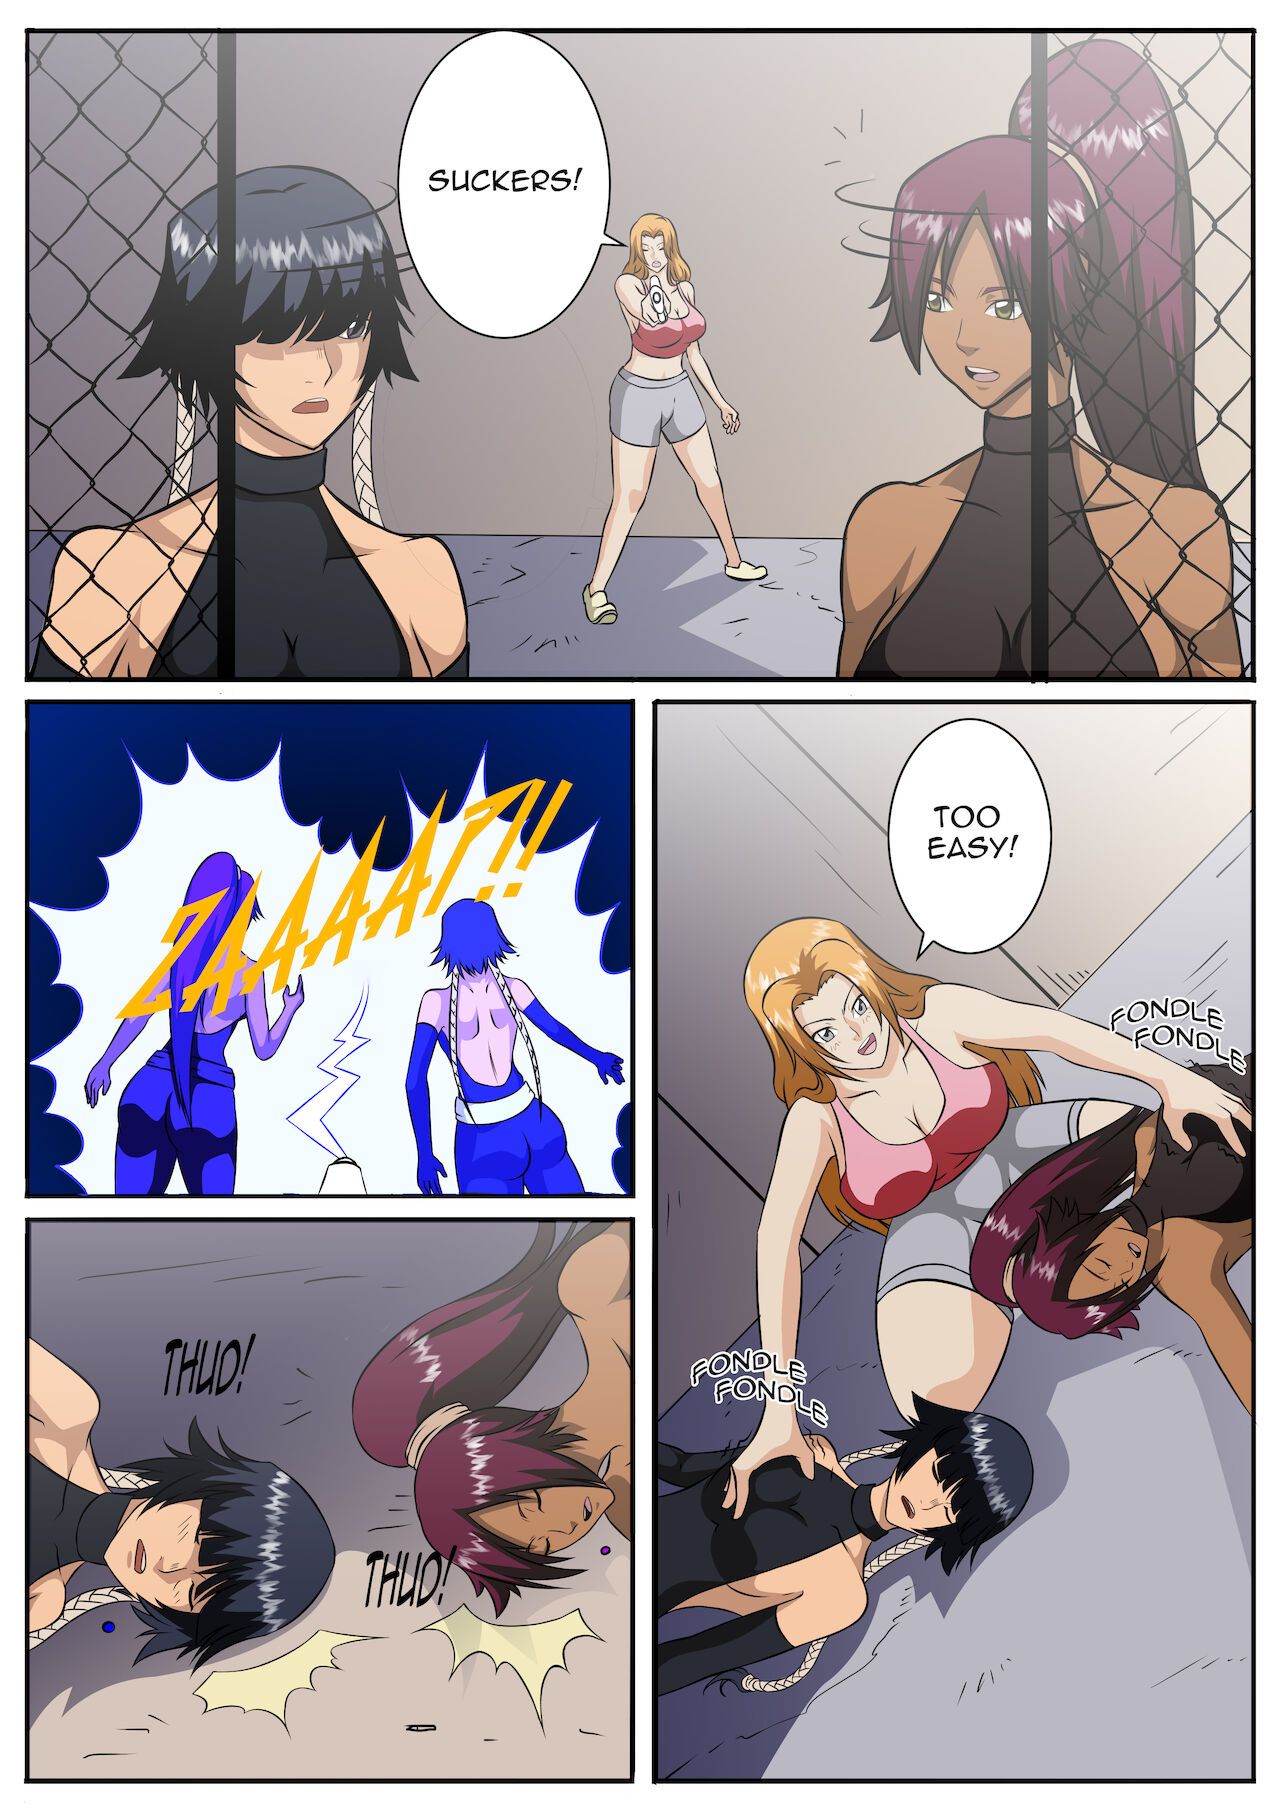 Bleach: A What If Story Part 5 Porn Comic english 02